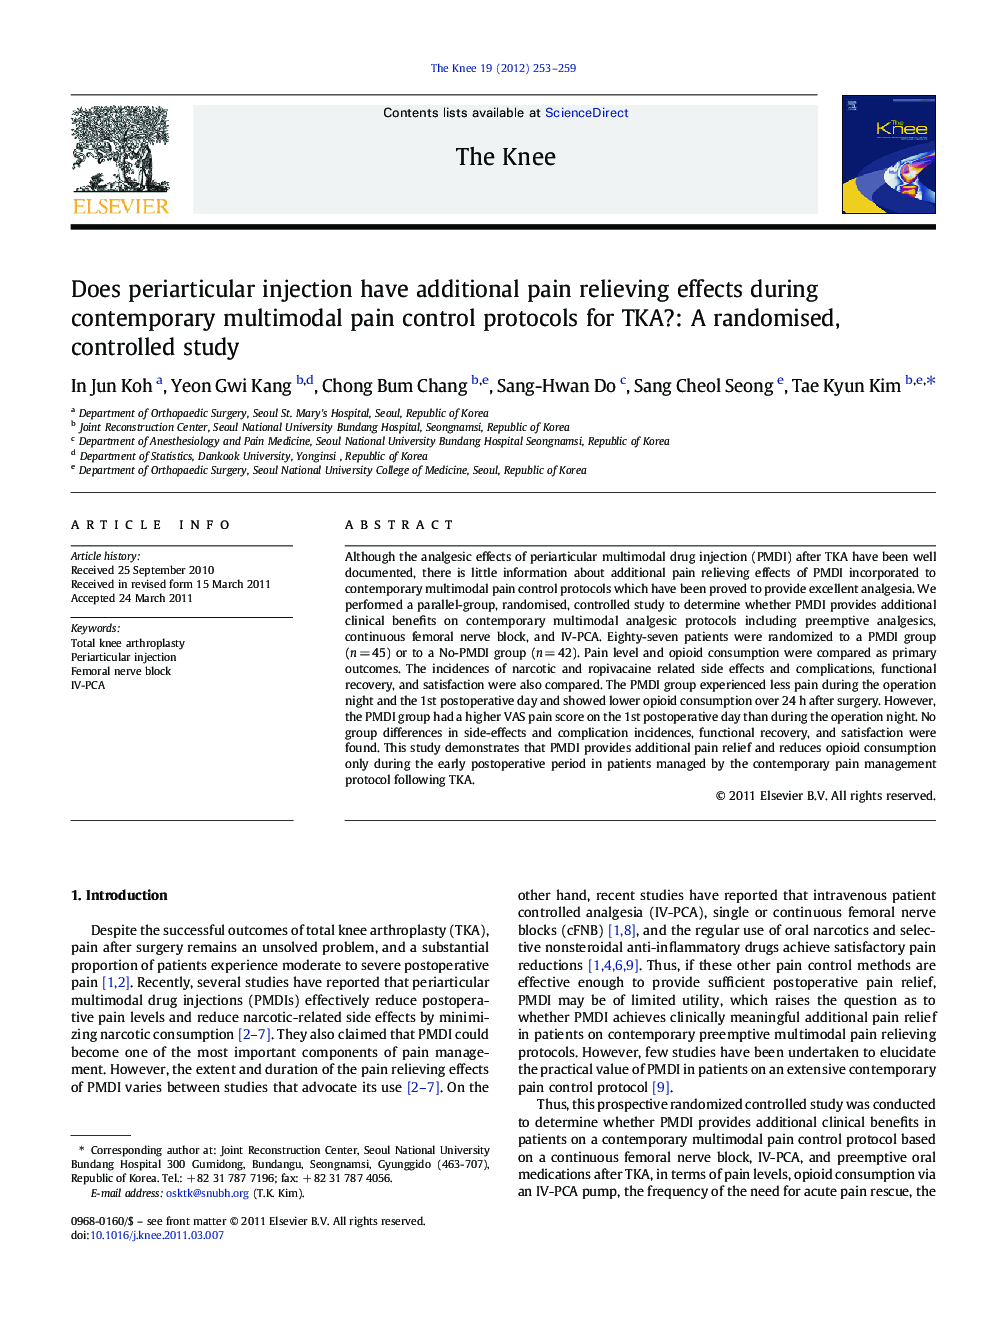 Does periarticular injection have additional pain relieving effects during contemporary multimodal pain control protocols for TKA?: A randomised, controlled study